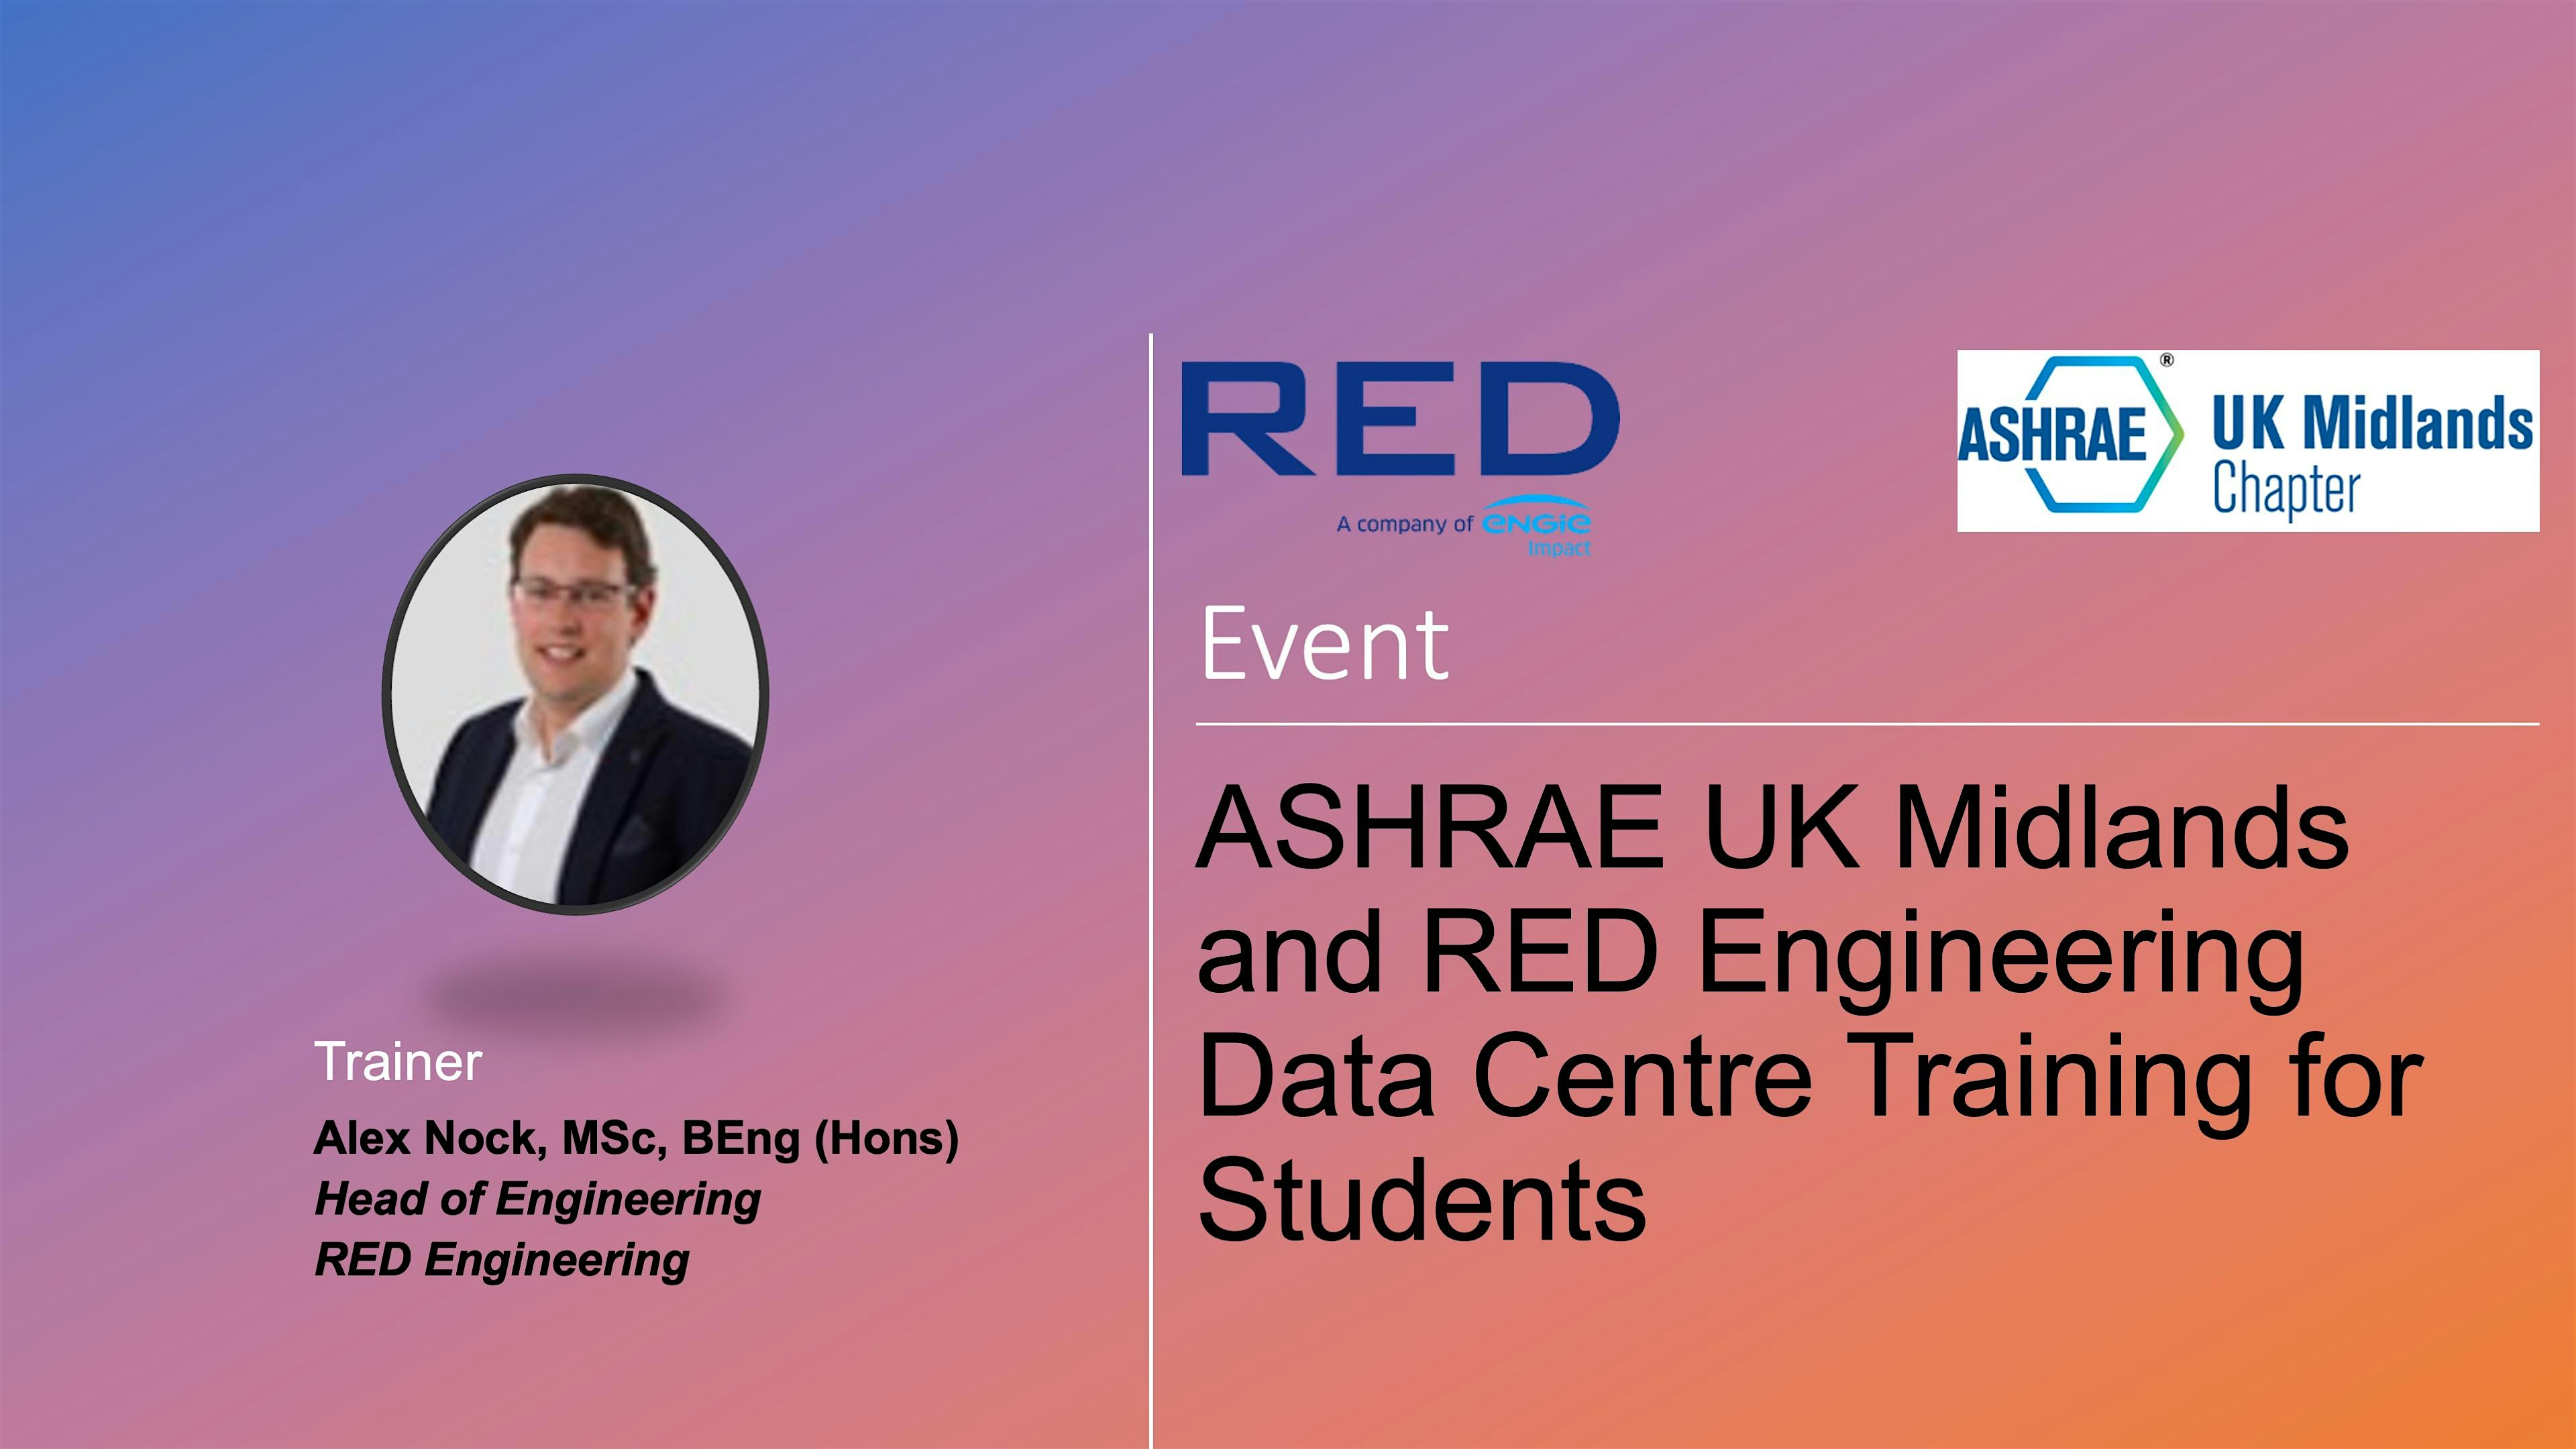 ASHRAE UK Midlands and RED Engineering Data Centre Training for Students